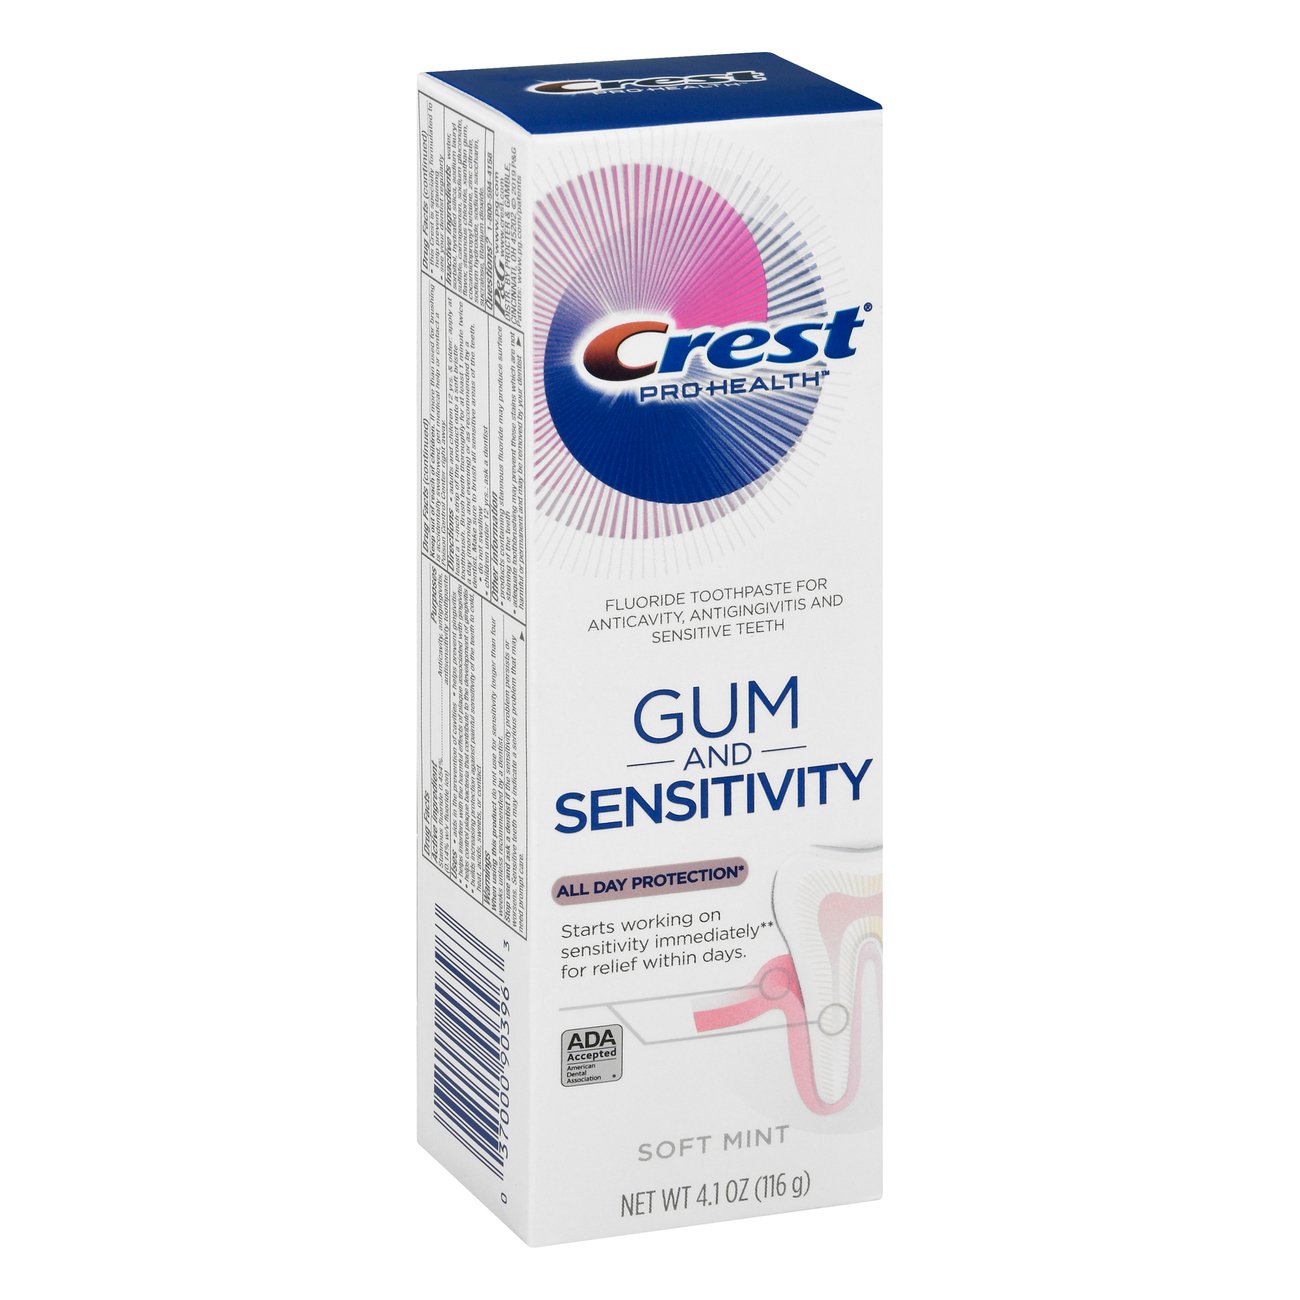 Crest Pro Health Gum And Sensitivity Toothpaste Shop Toothpaste At H E B